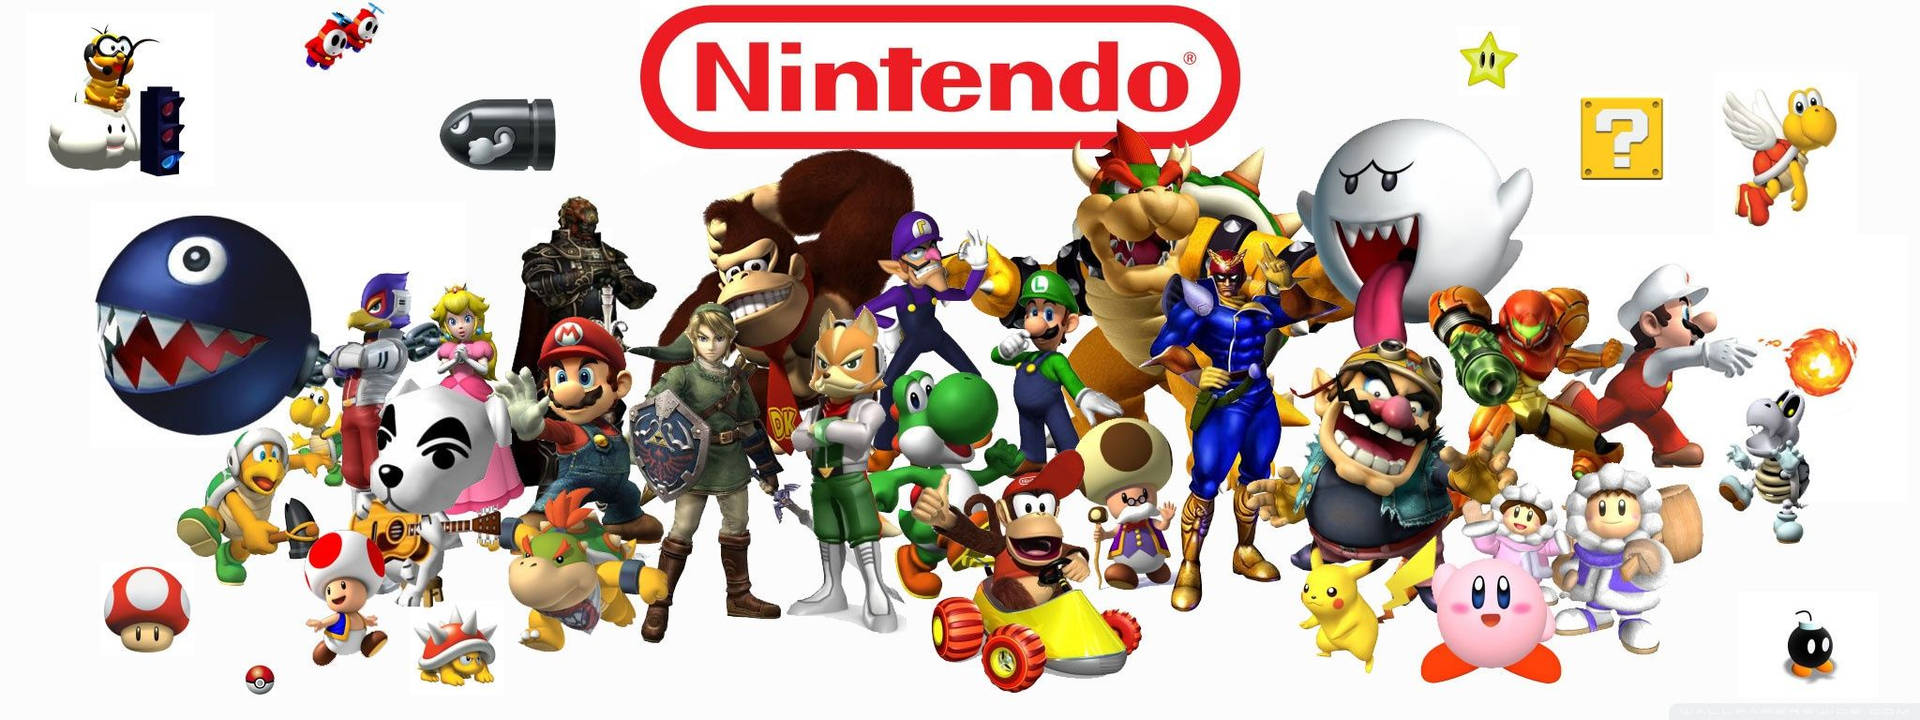 Nintendo Game Characters Background